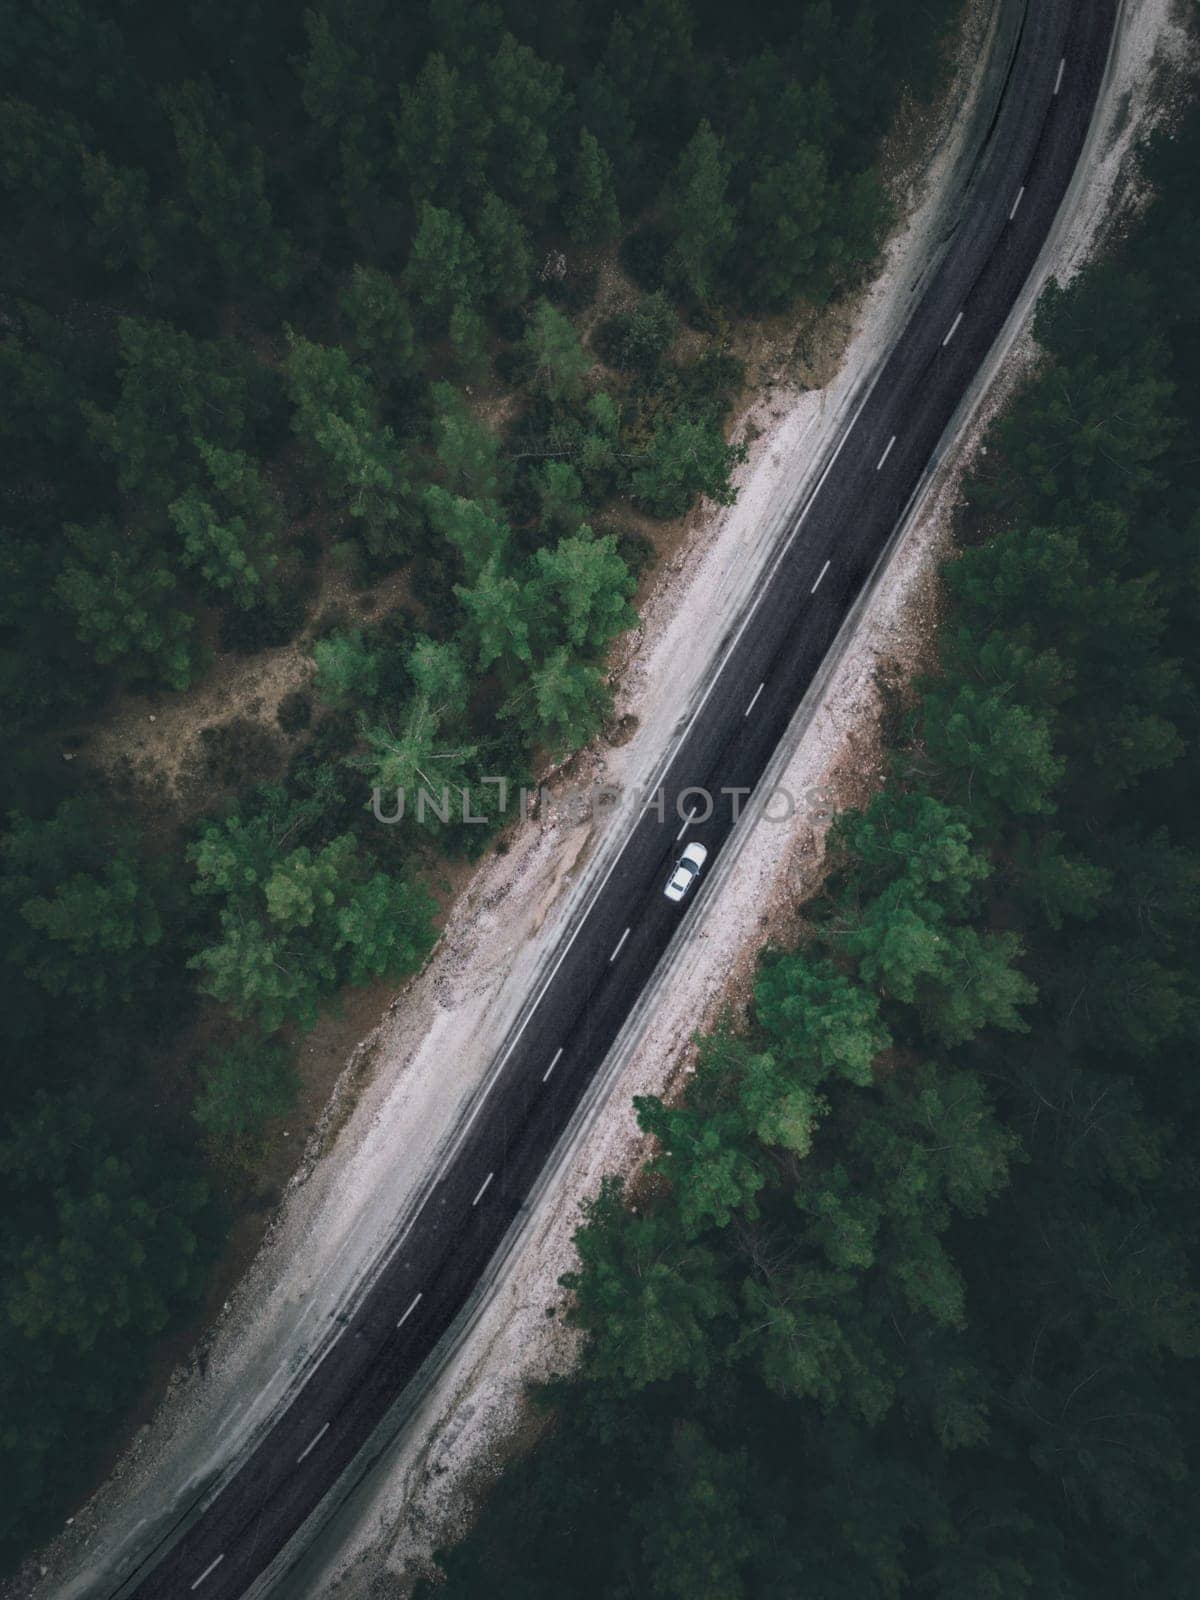 Aerial view taken by drone of a car driving on a forest road in autumn